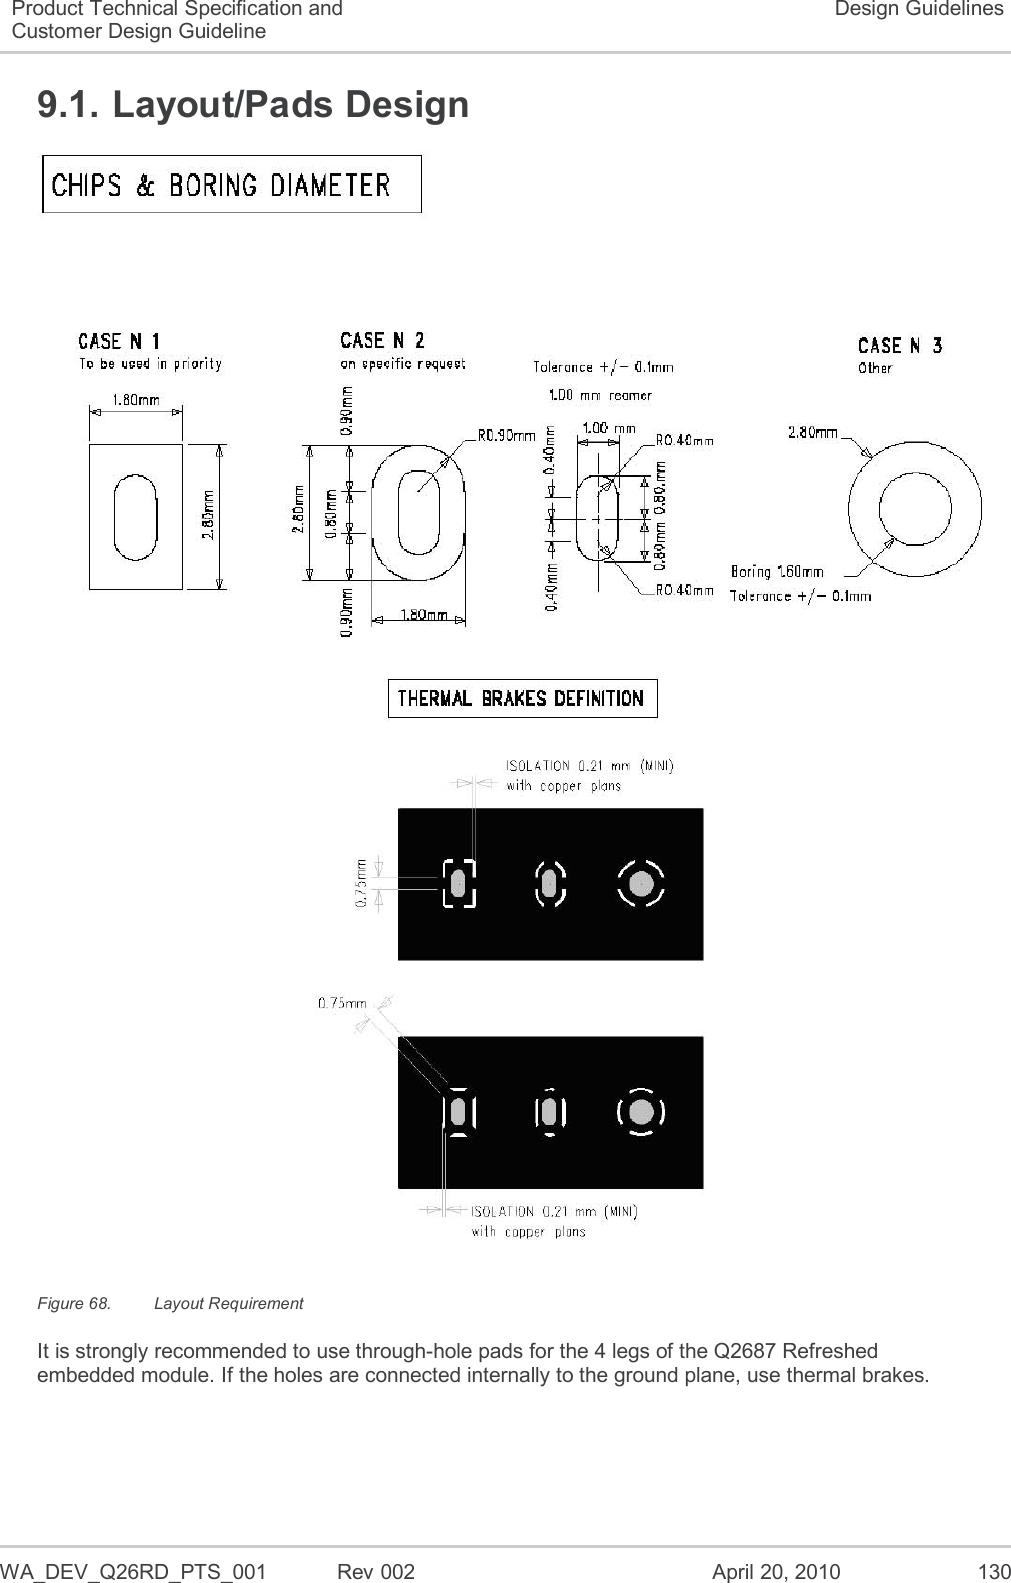   WA_DEV_Q26RD_PTS_001  Rev 002  April 20, 2010 130 Product Technical Specification and Customer Design Guideline Design Guidelines 9.1. Layout/Pads Design  Figure 68.  Layout Requirement It is strongly recommended to use through-hole pads for the 4 legs of the Q2687 Refreshed embedded module. If the holes are connected internally to the ground plane, use thermal brakes. 